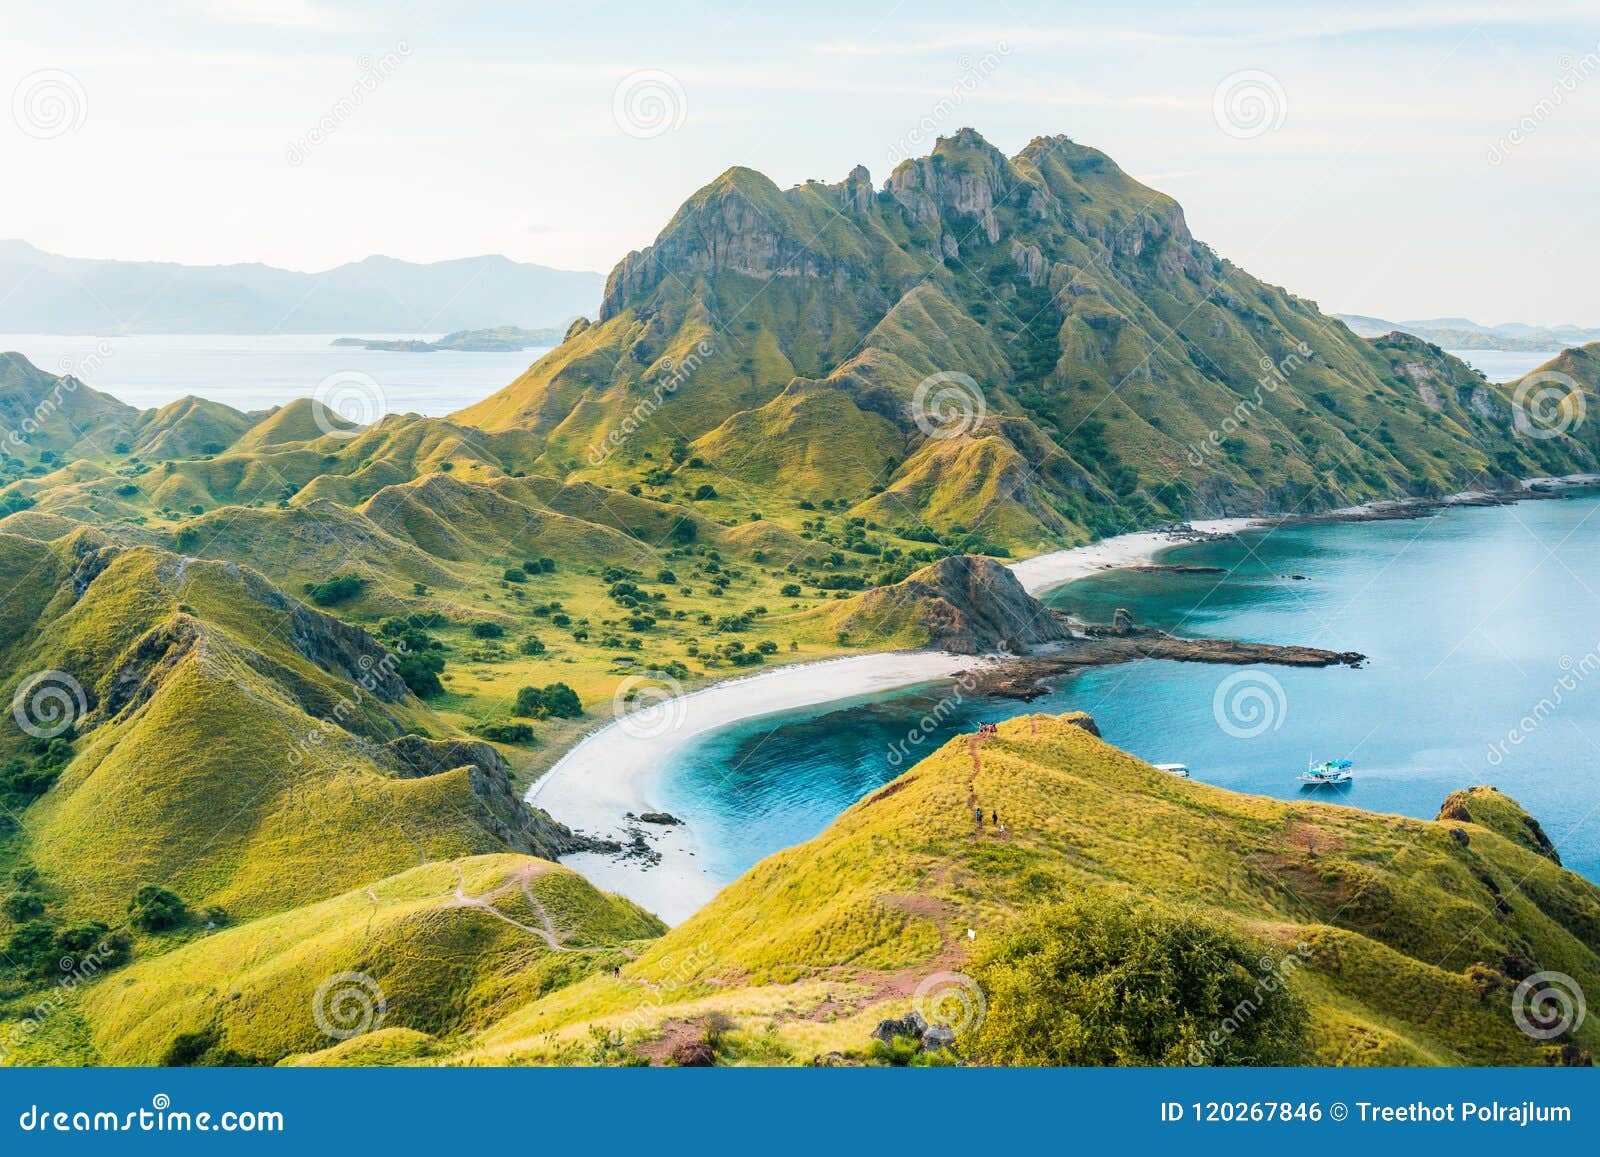 view of padar island in a cloudy evening with blue water surface and tourist boats